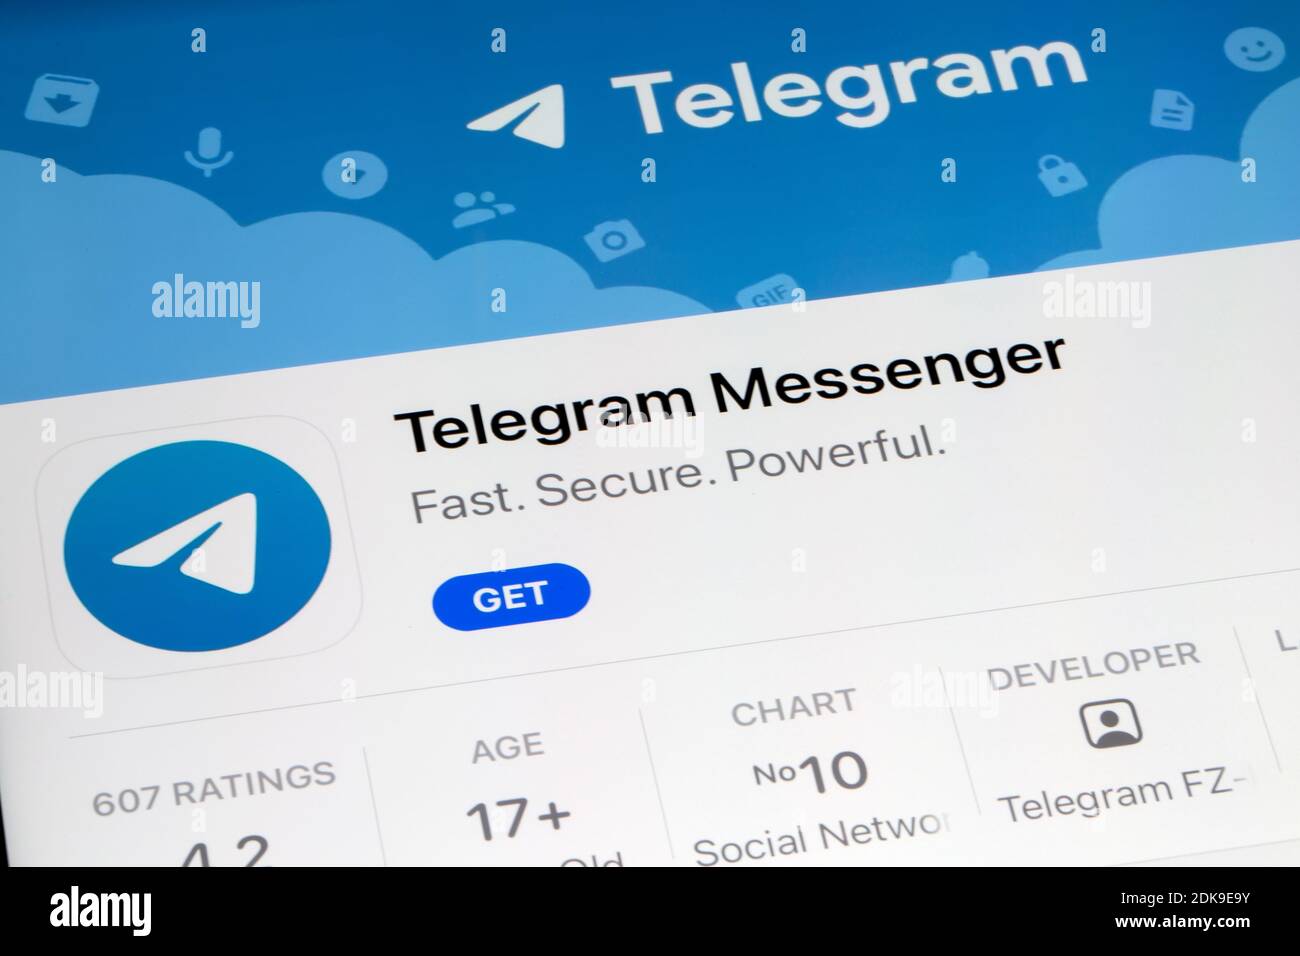 Ostersund, Sweden - August 2, 2020: Telegram Messenger app. Telegram is a cloud-based instant messaging, videotelephony and voice over IP service. Stock Photo